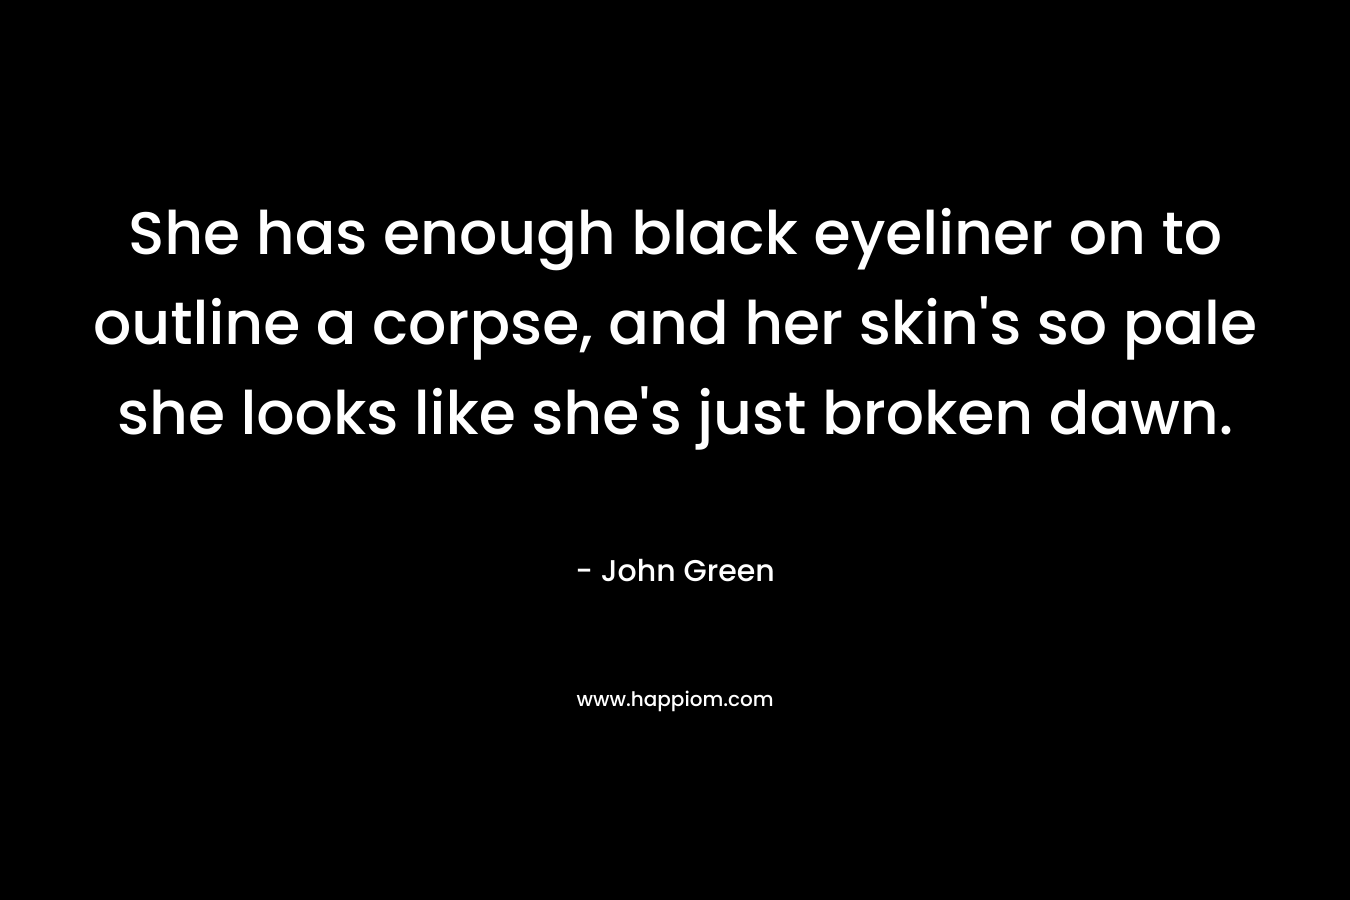 She has enough black eyeliner on to outline a corpse, and her skin’s so pale she looks like she’s just broken dawn. – John Green